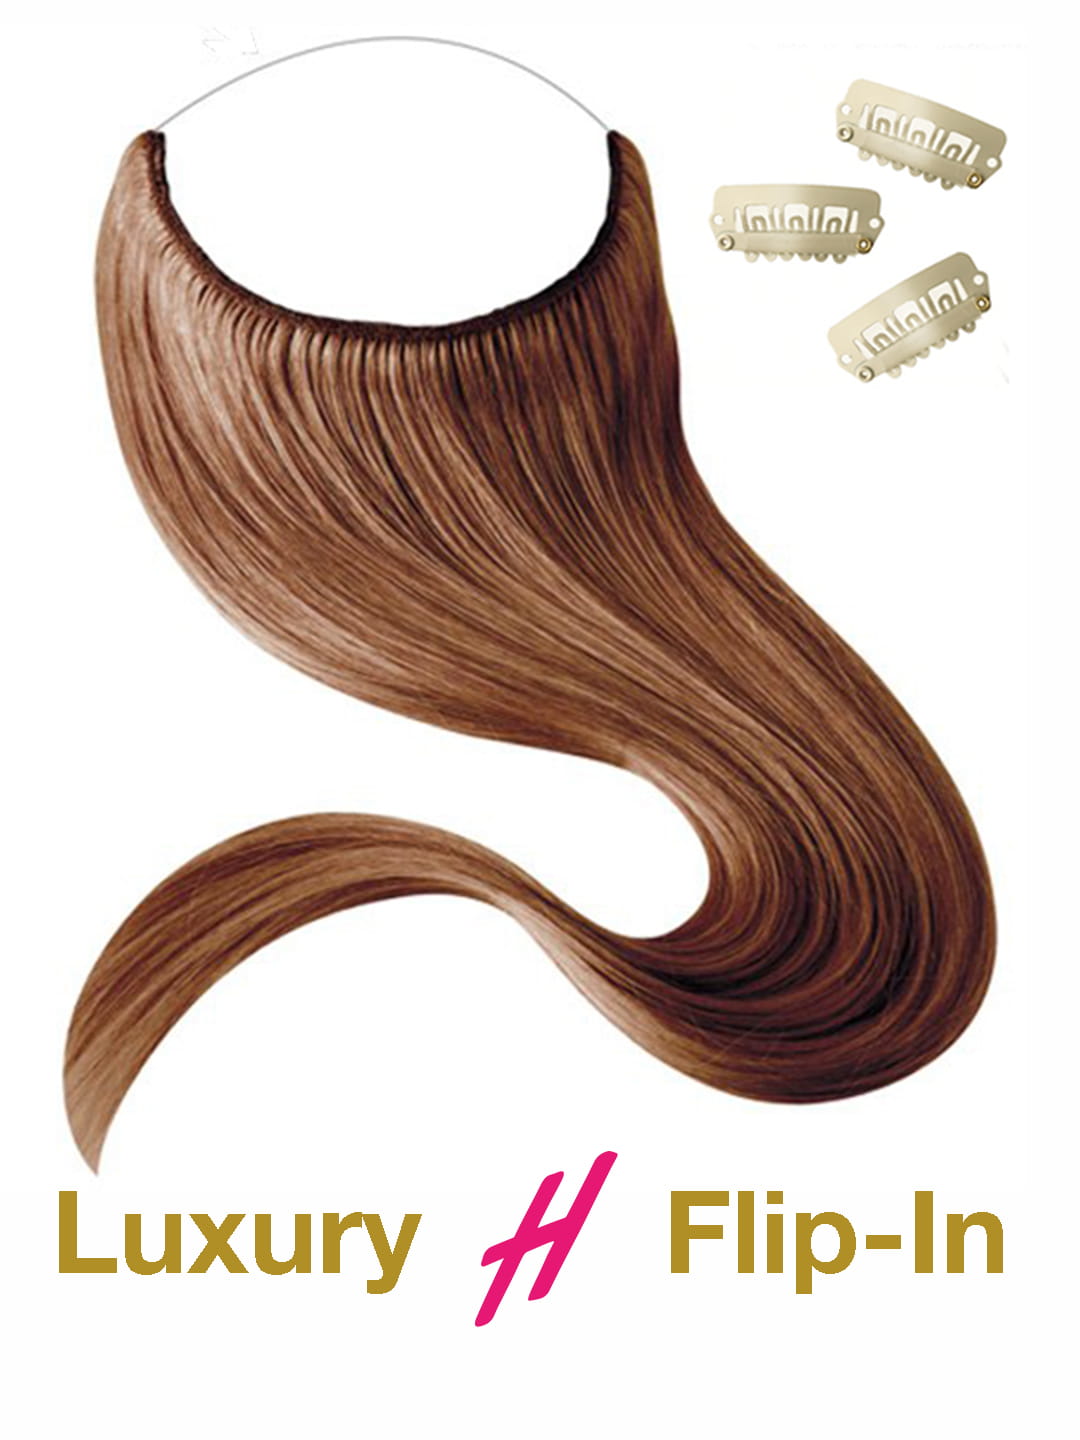 Flip in Extensions - one piece - luxury Qualität B14/1001 variant detail image - 5174906efc27d67f5e2ab2fba209262779a28ae719939297aa836ed39d30e399